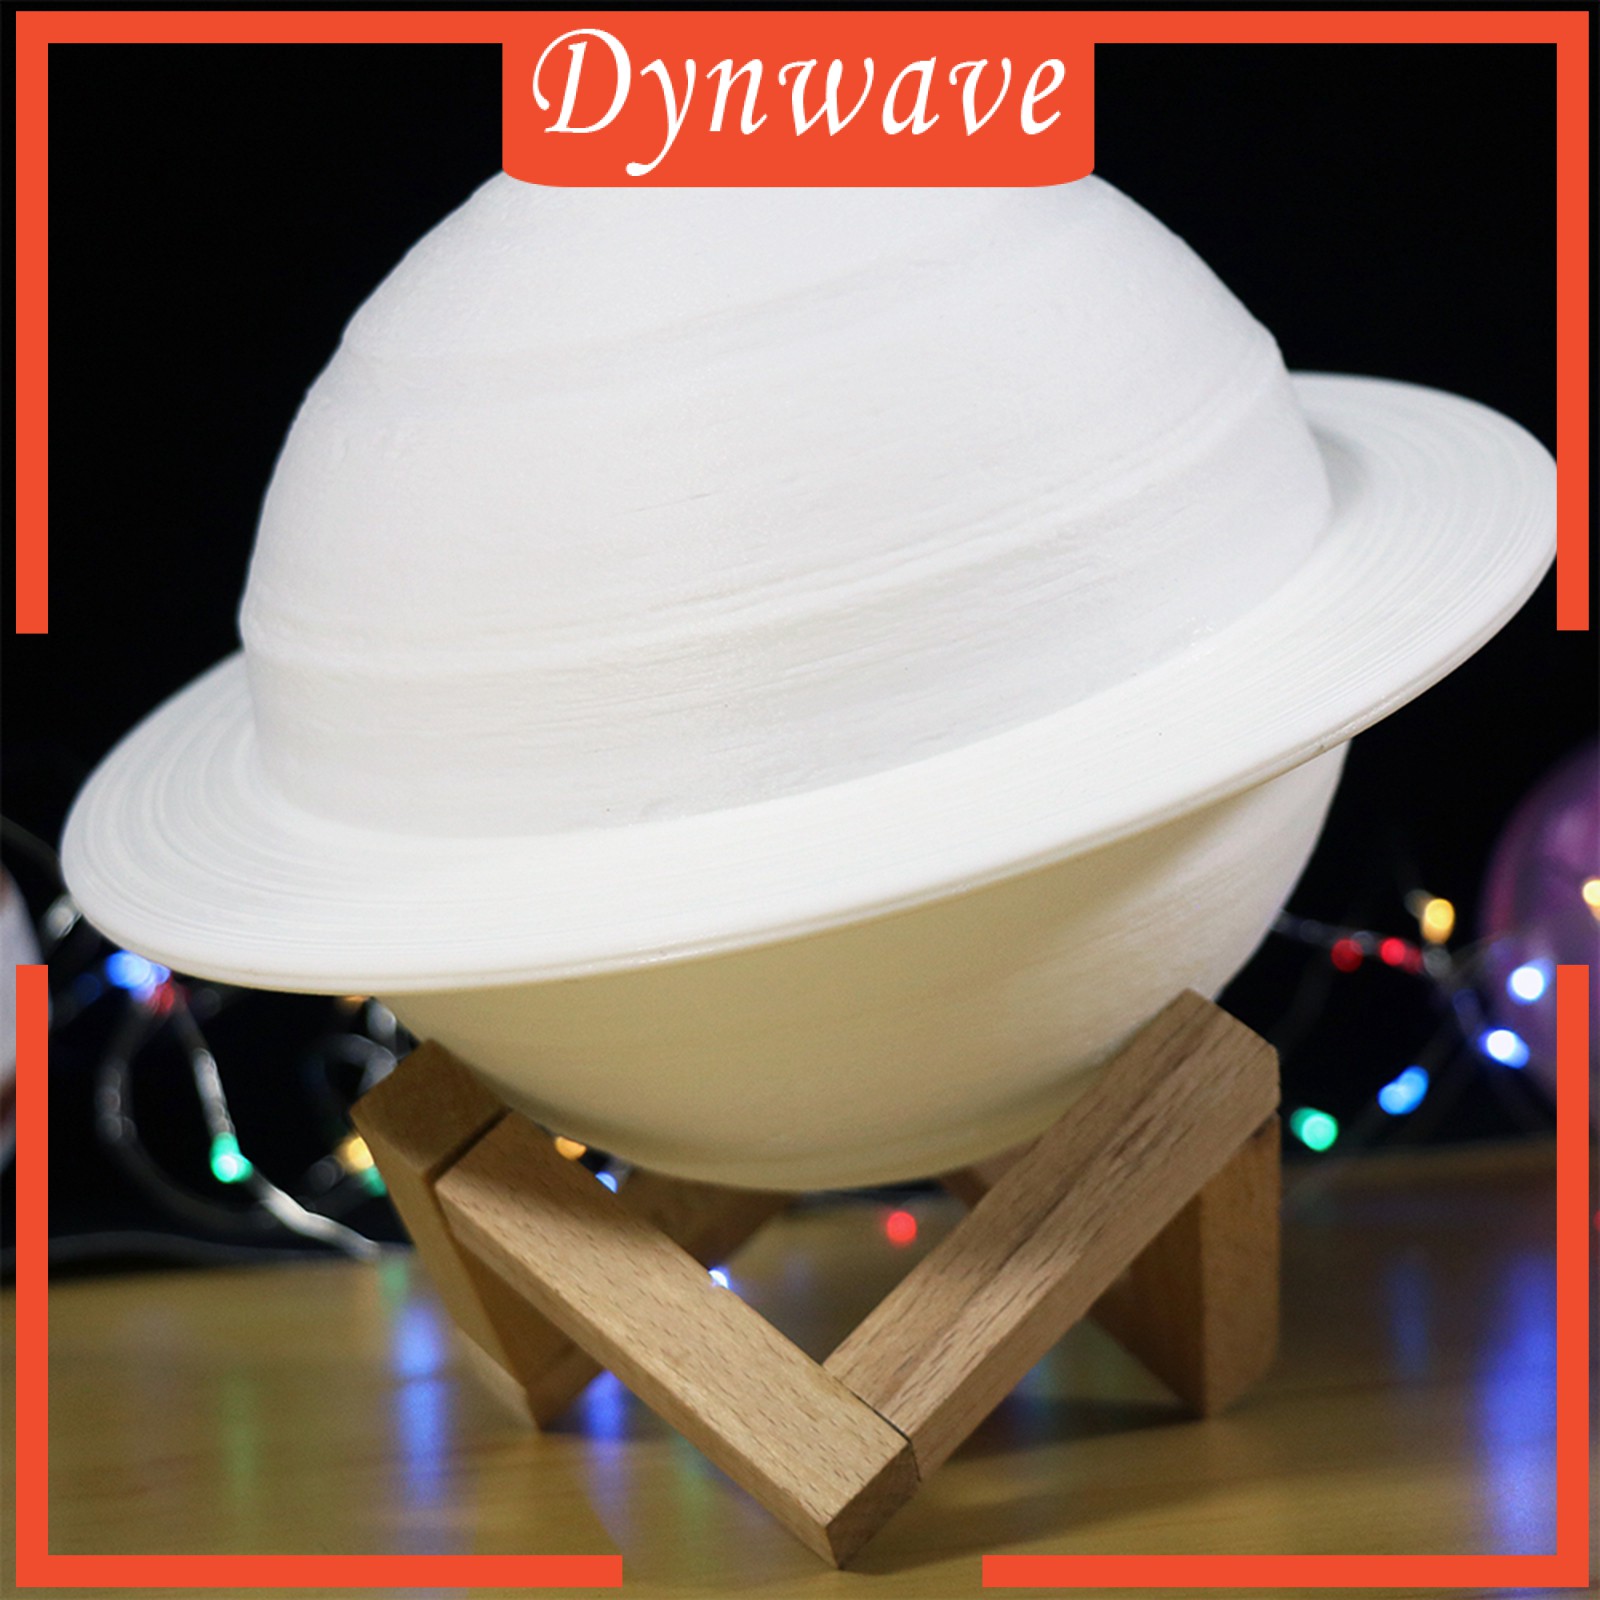 [DYNWAVE] SATURN LAMP TOUCH CONTROL &amp; REMOTE CONTROL SPACE BEDROOM NIGHT LIGHT GIFTS